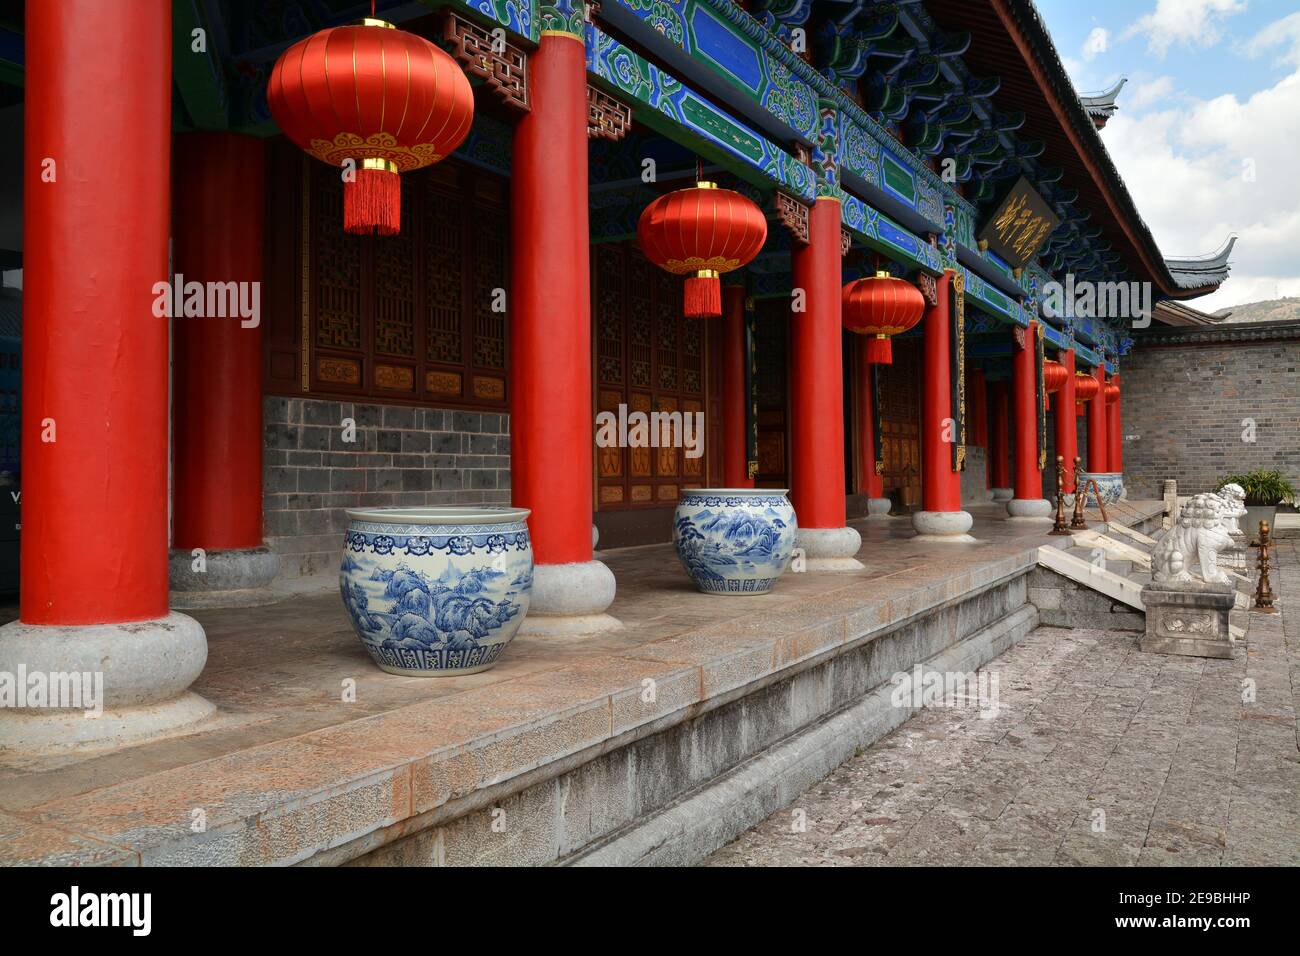 Beautiful colours and architecture inside Mu's residence, Lijiang, China. Head of the Naxi people during Ming and Qing periods. Stock Photo